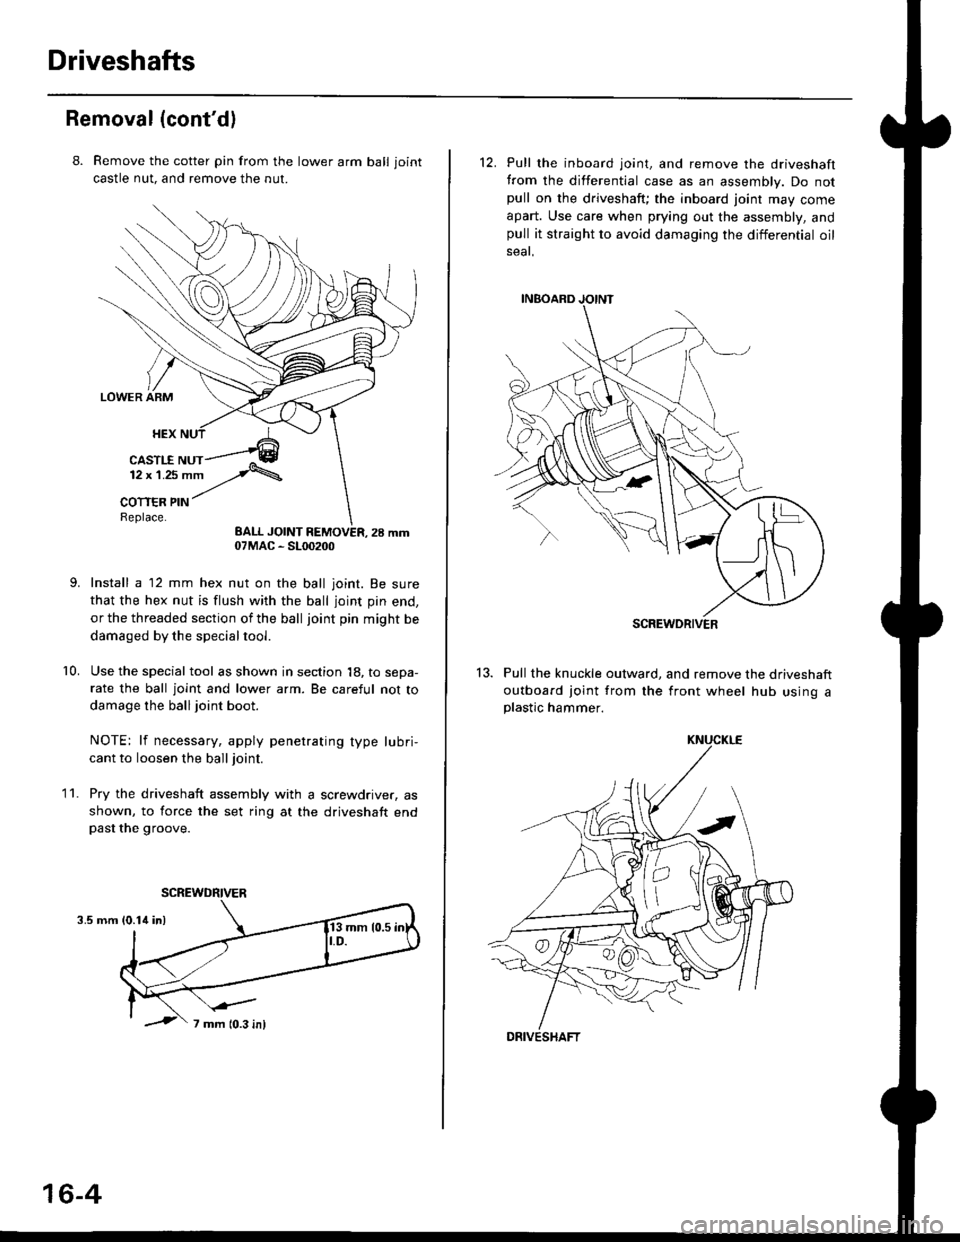 HONDA CIVIC 1998 6.G Workshop Manual Driveshafts
Removal (contd)
8. Remove the cotter pin from the lawer arm ball joint
castle nut. and remove the nut.
Install a 12 mm hex nut on the ball joint. Be sure
that the hex nut is flush with th